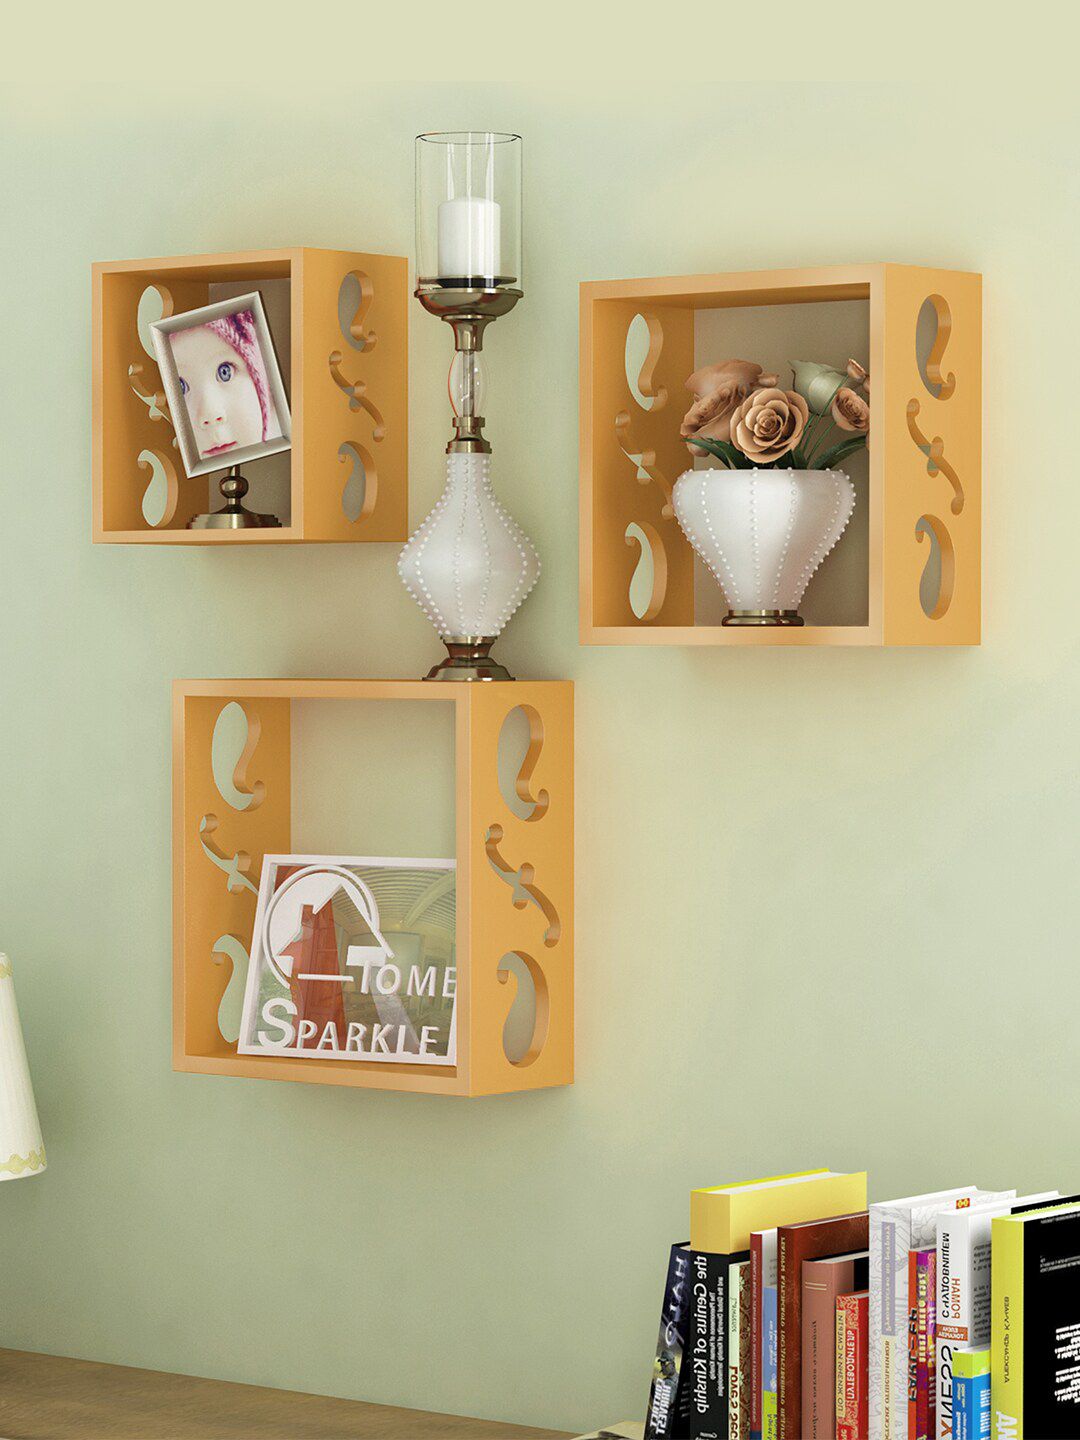 Home Sparkle Set Of 3 Gold-Tone Decorative Wall Mounted Shelf Price in India